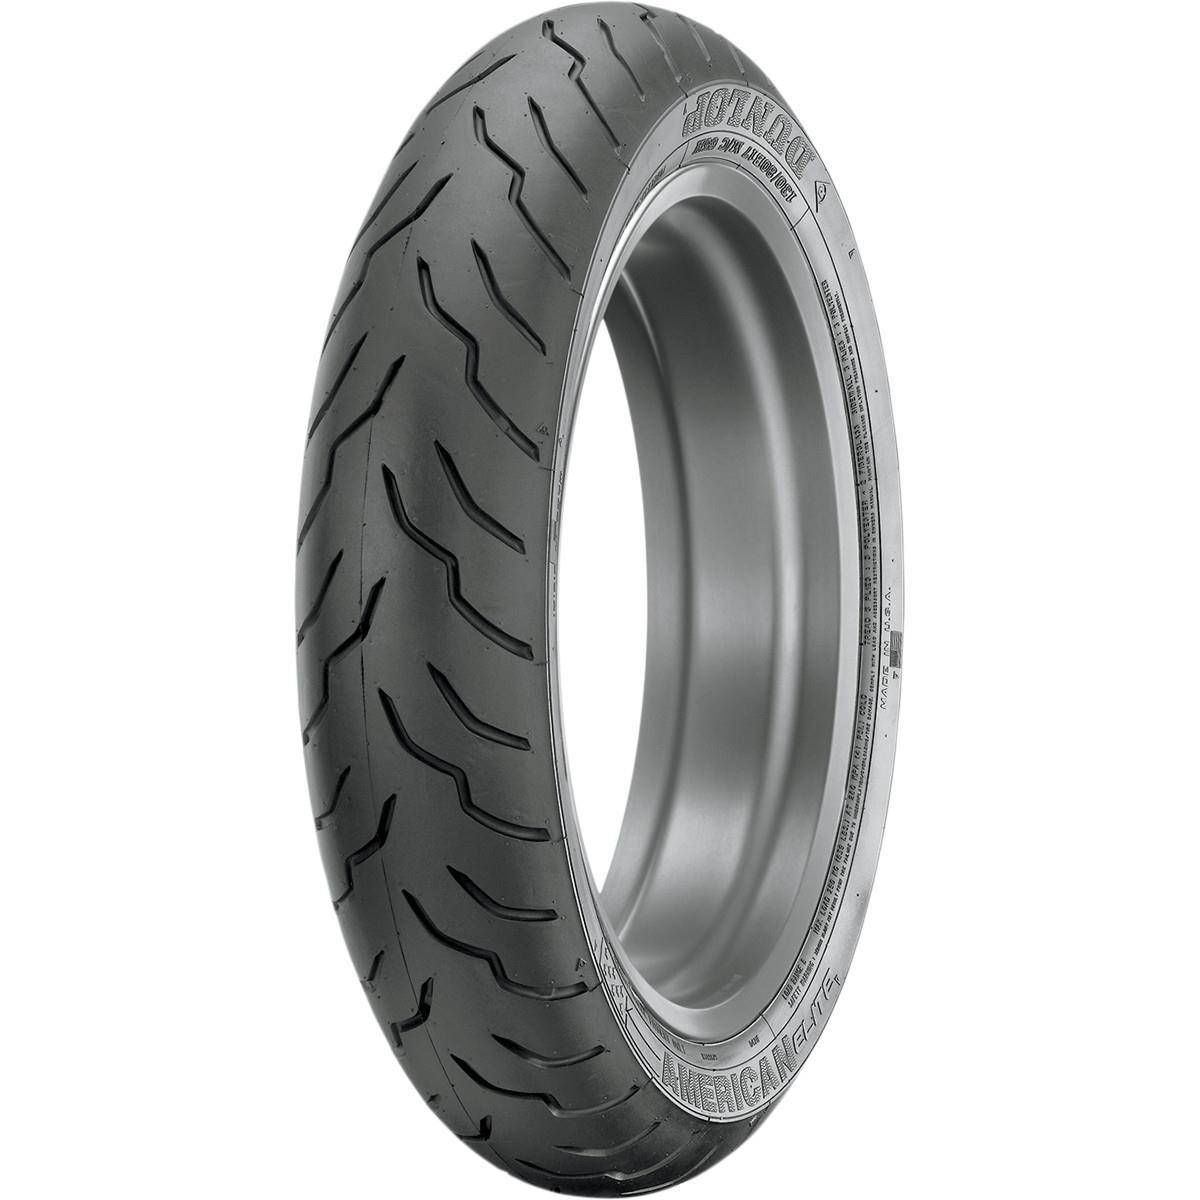 Dunlop American Elite Front Motorcycle Tire 130/60B-19 61H Black Wall for Harley-Davidson CVO Street Glide FLHXSE 2015-2018 